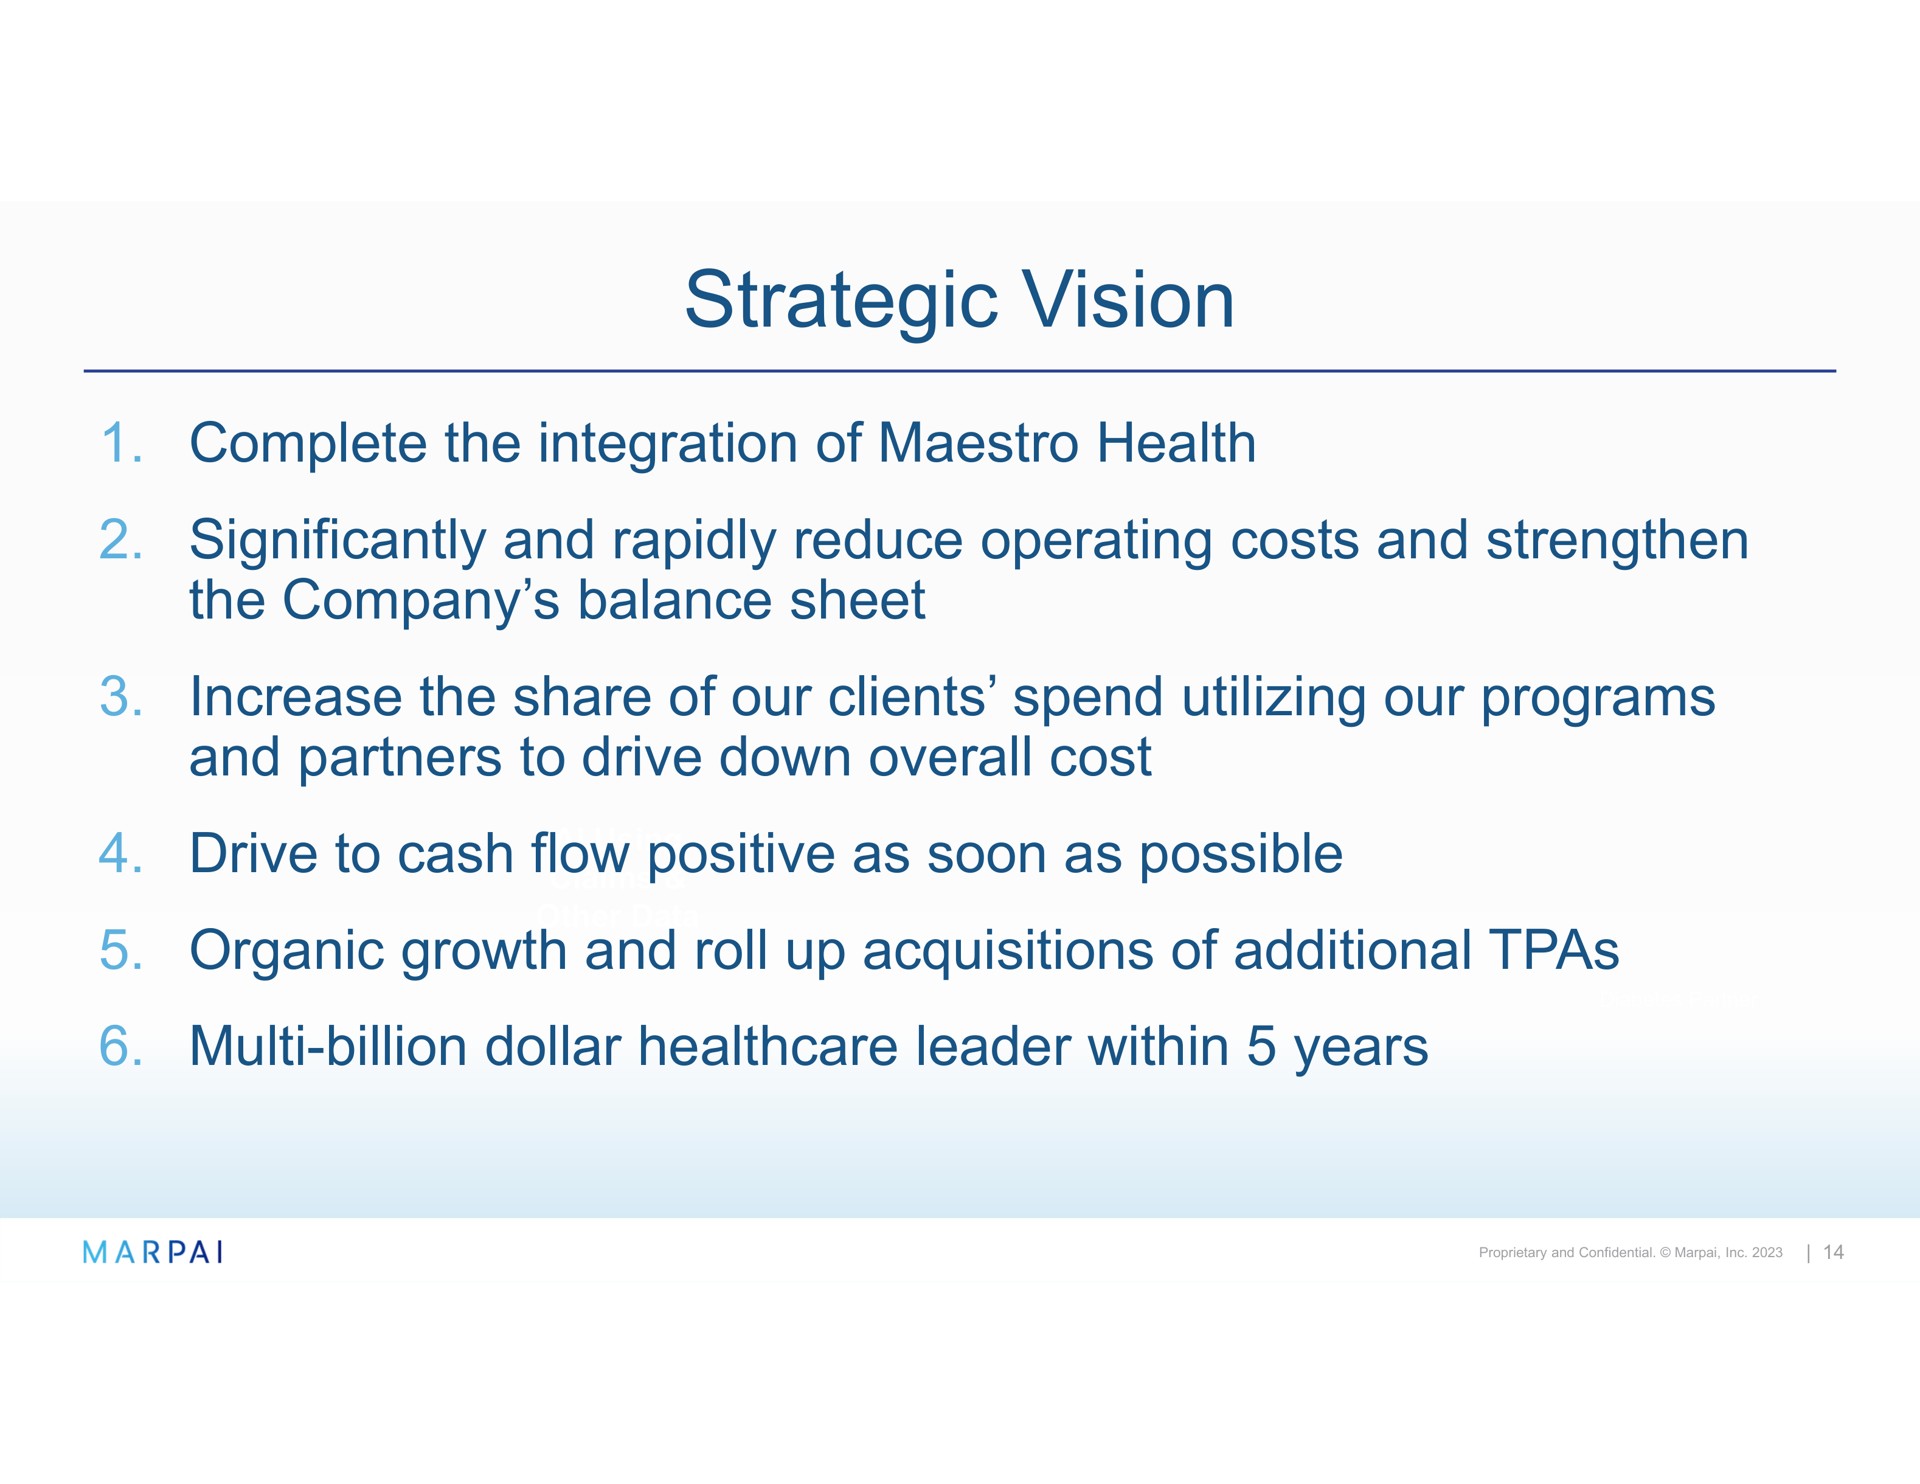 strategic vision complete the integration of maestro health significantly and rapidly reduce operating costs and strengthen the company balance sheet increase the share of our clients spend utilizing our programs and partners to drive down overall cost drive to cash flow positive as soon as possible organic growth and roll up acquisitions of additional billion dollar leader within years | Marpai